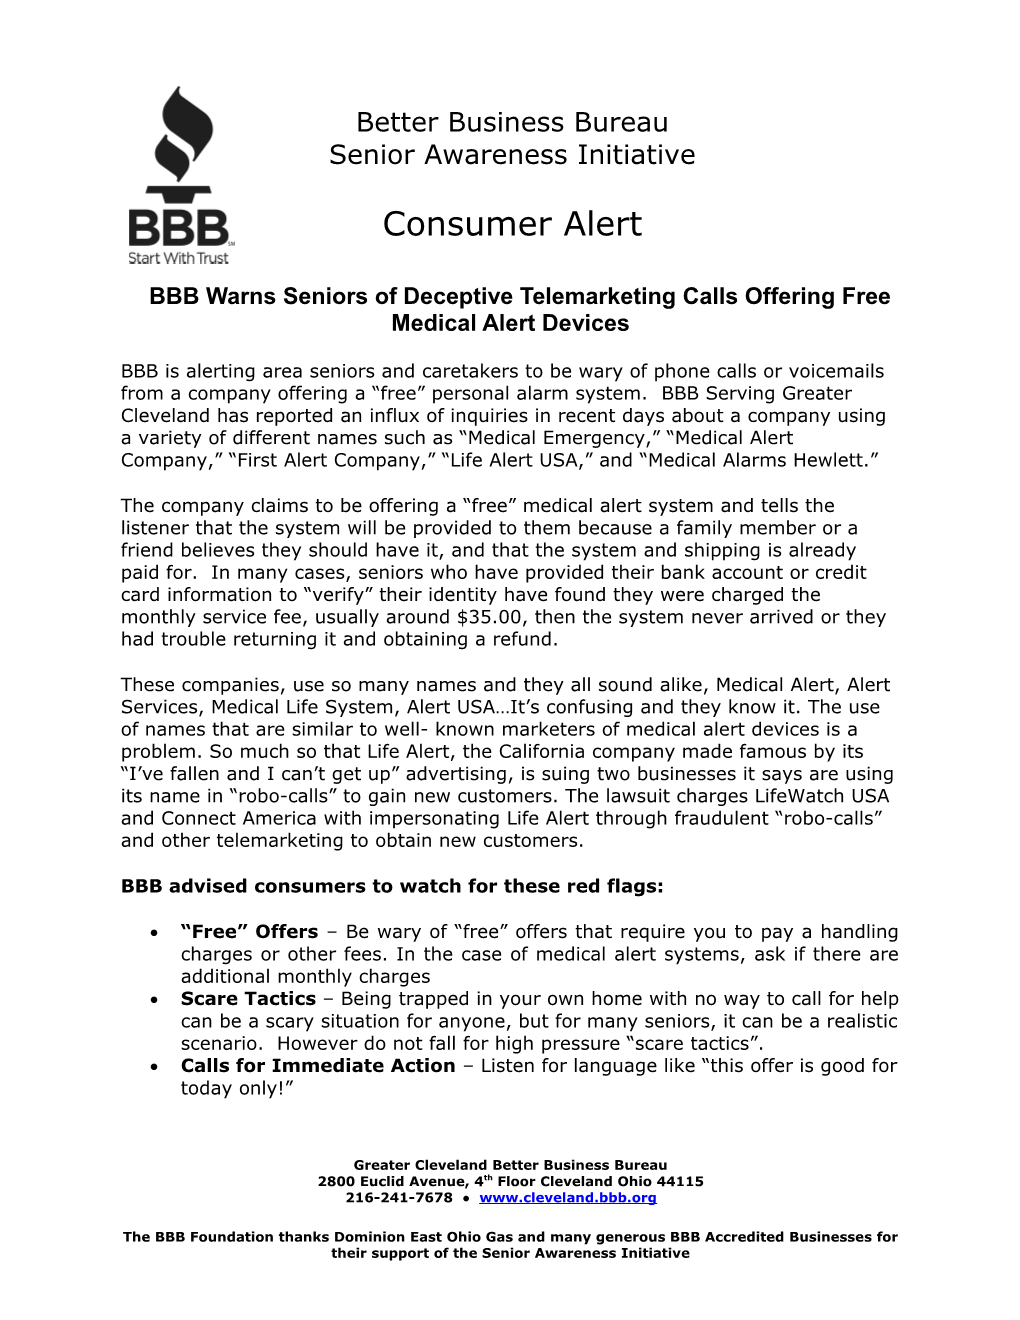 BBB Advised Consumers to Watch for These Red Flags